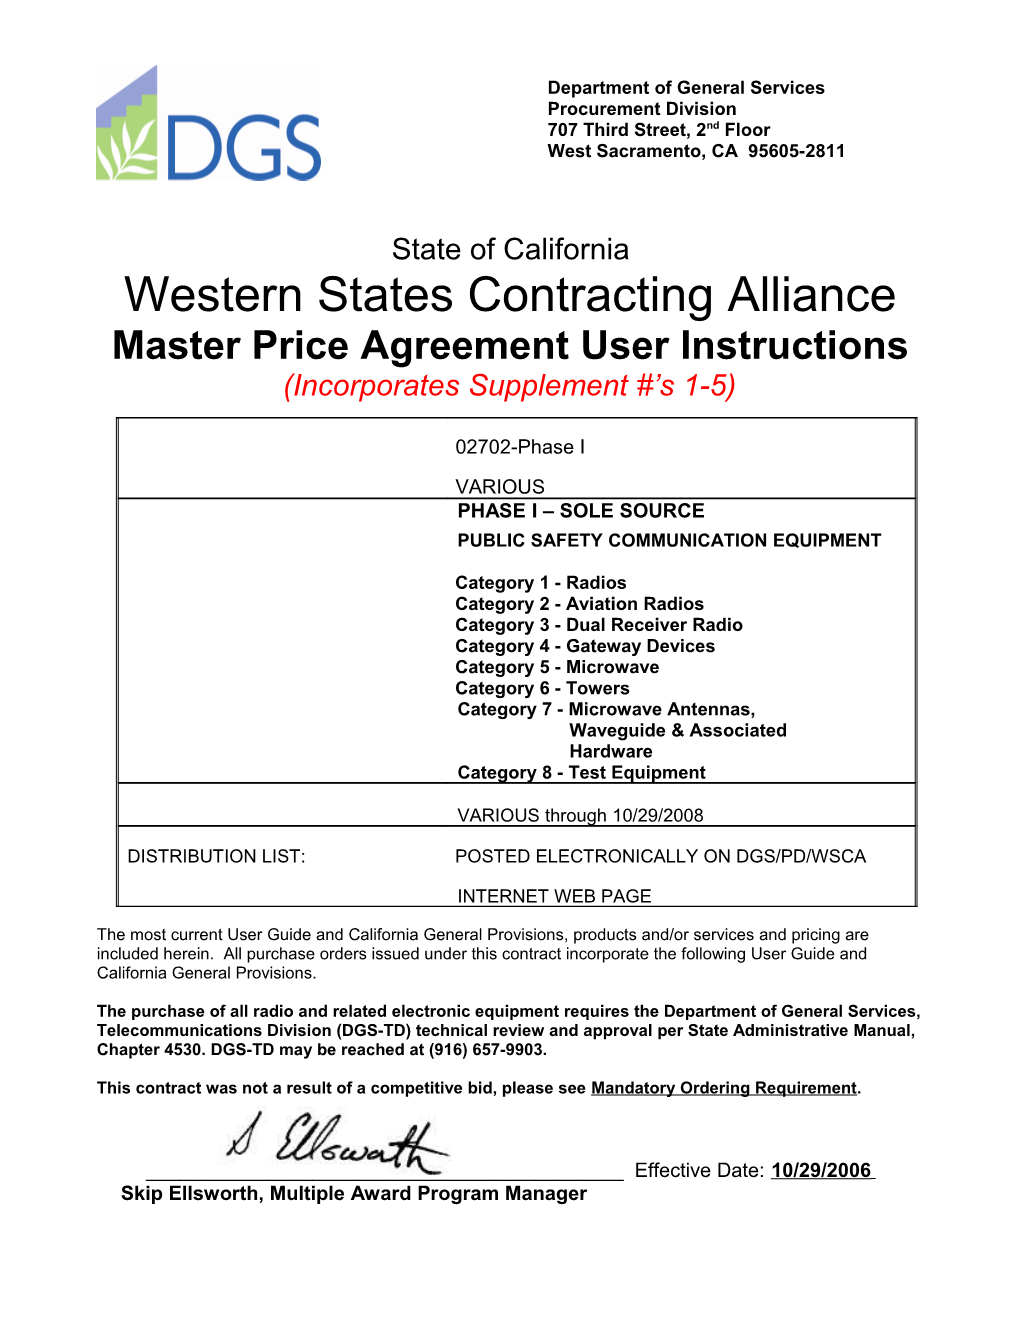 Western States Contracting Alliance (Wsca) User Instructions